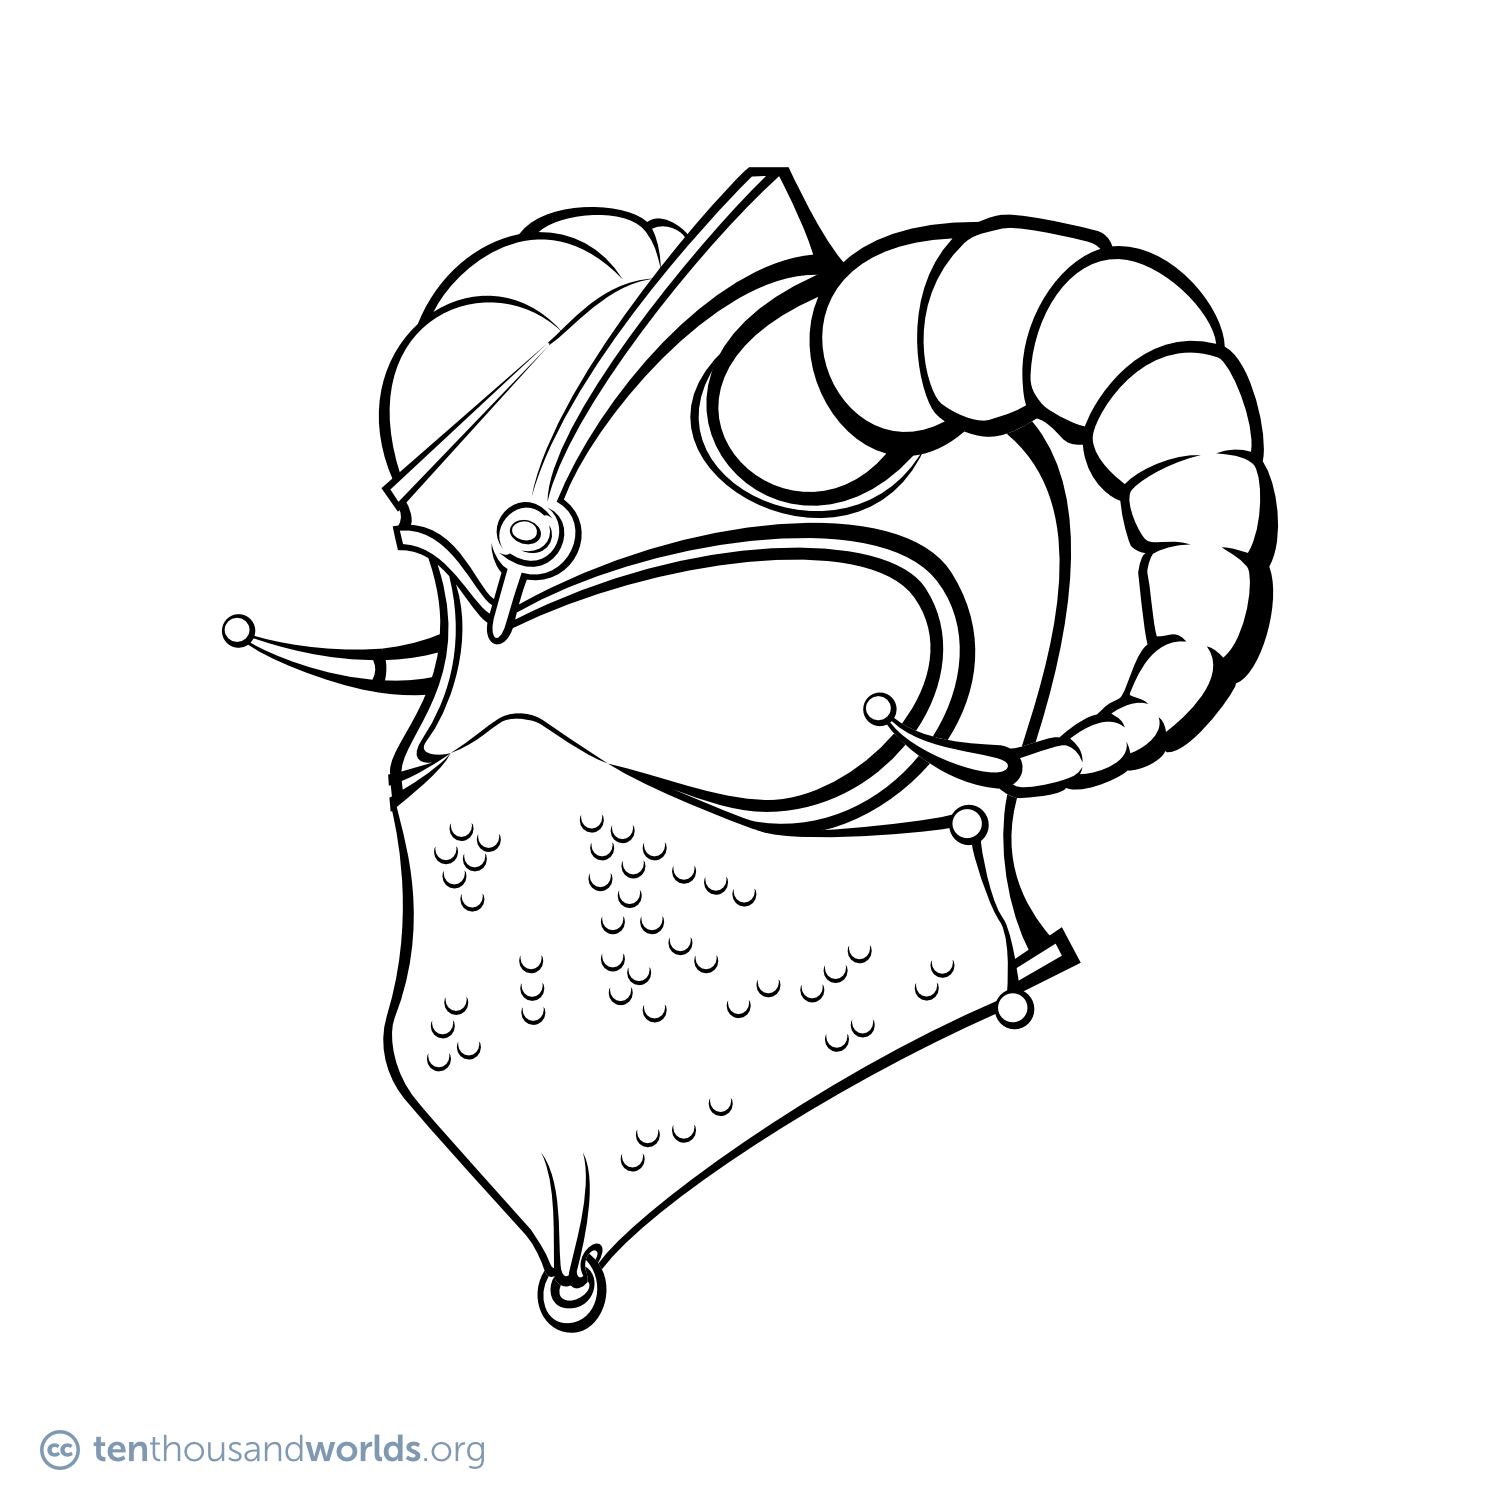 An ink outline of a bullet-shaped helmet, adorned with a central fin, a jewel set in the forehead, and a massive pair of ram’s horns. A chain-mail veil protects the area around the nose and mouth.